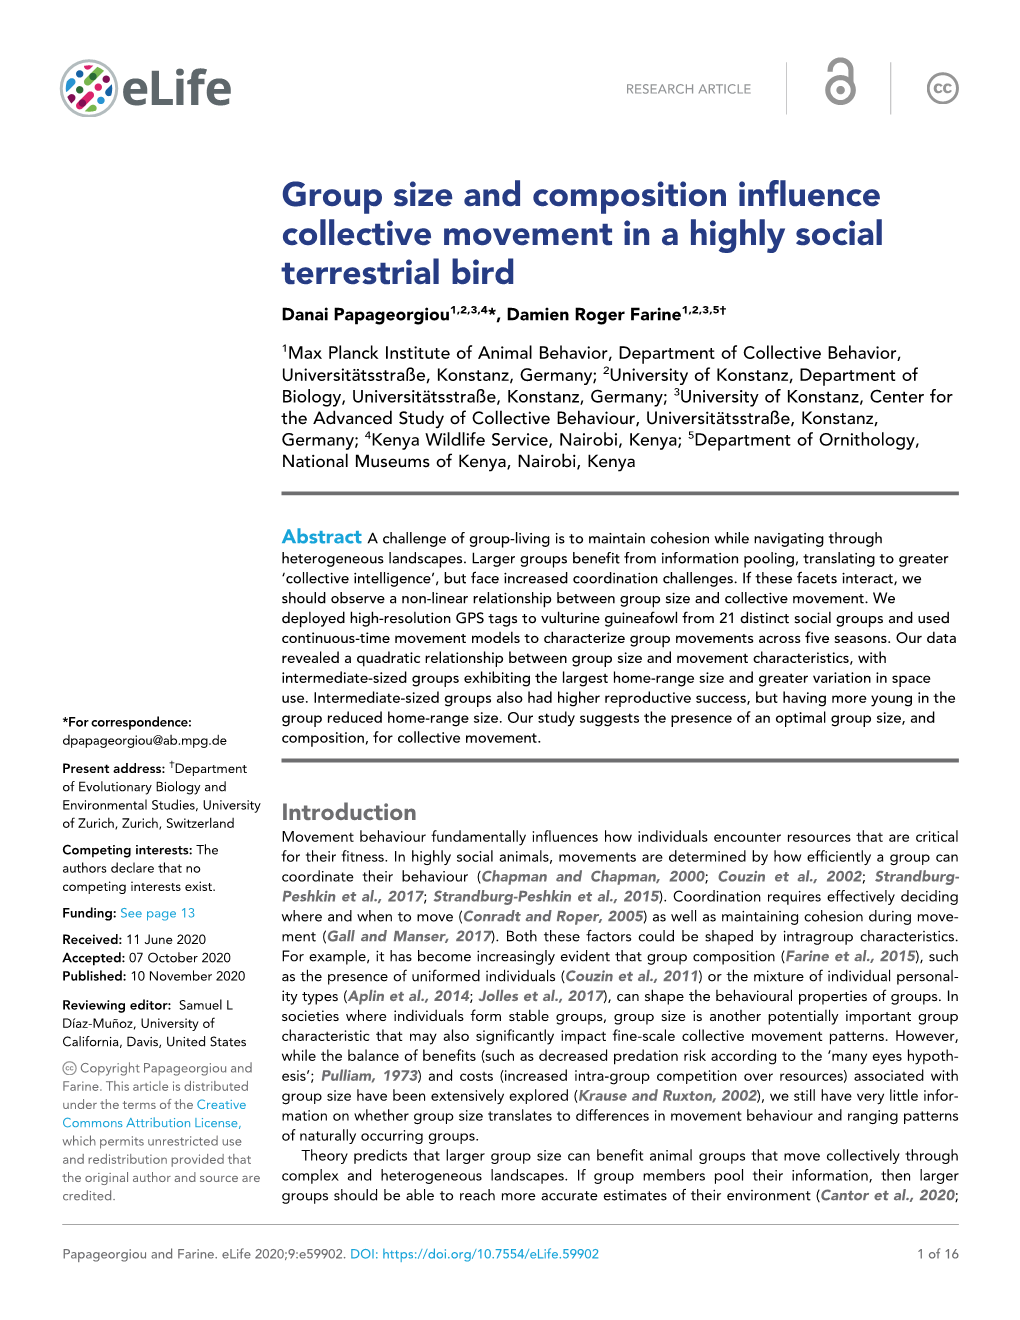 Group Size and Composition Influence Collective Movement in a Highly Social Terrestrial Bird Danai Papageorgiou1,2,3,4*, Damien Roger Farine1,2,3,5†